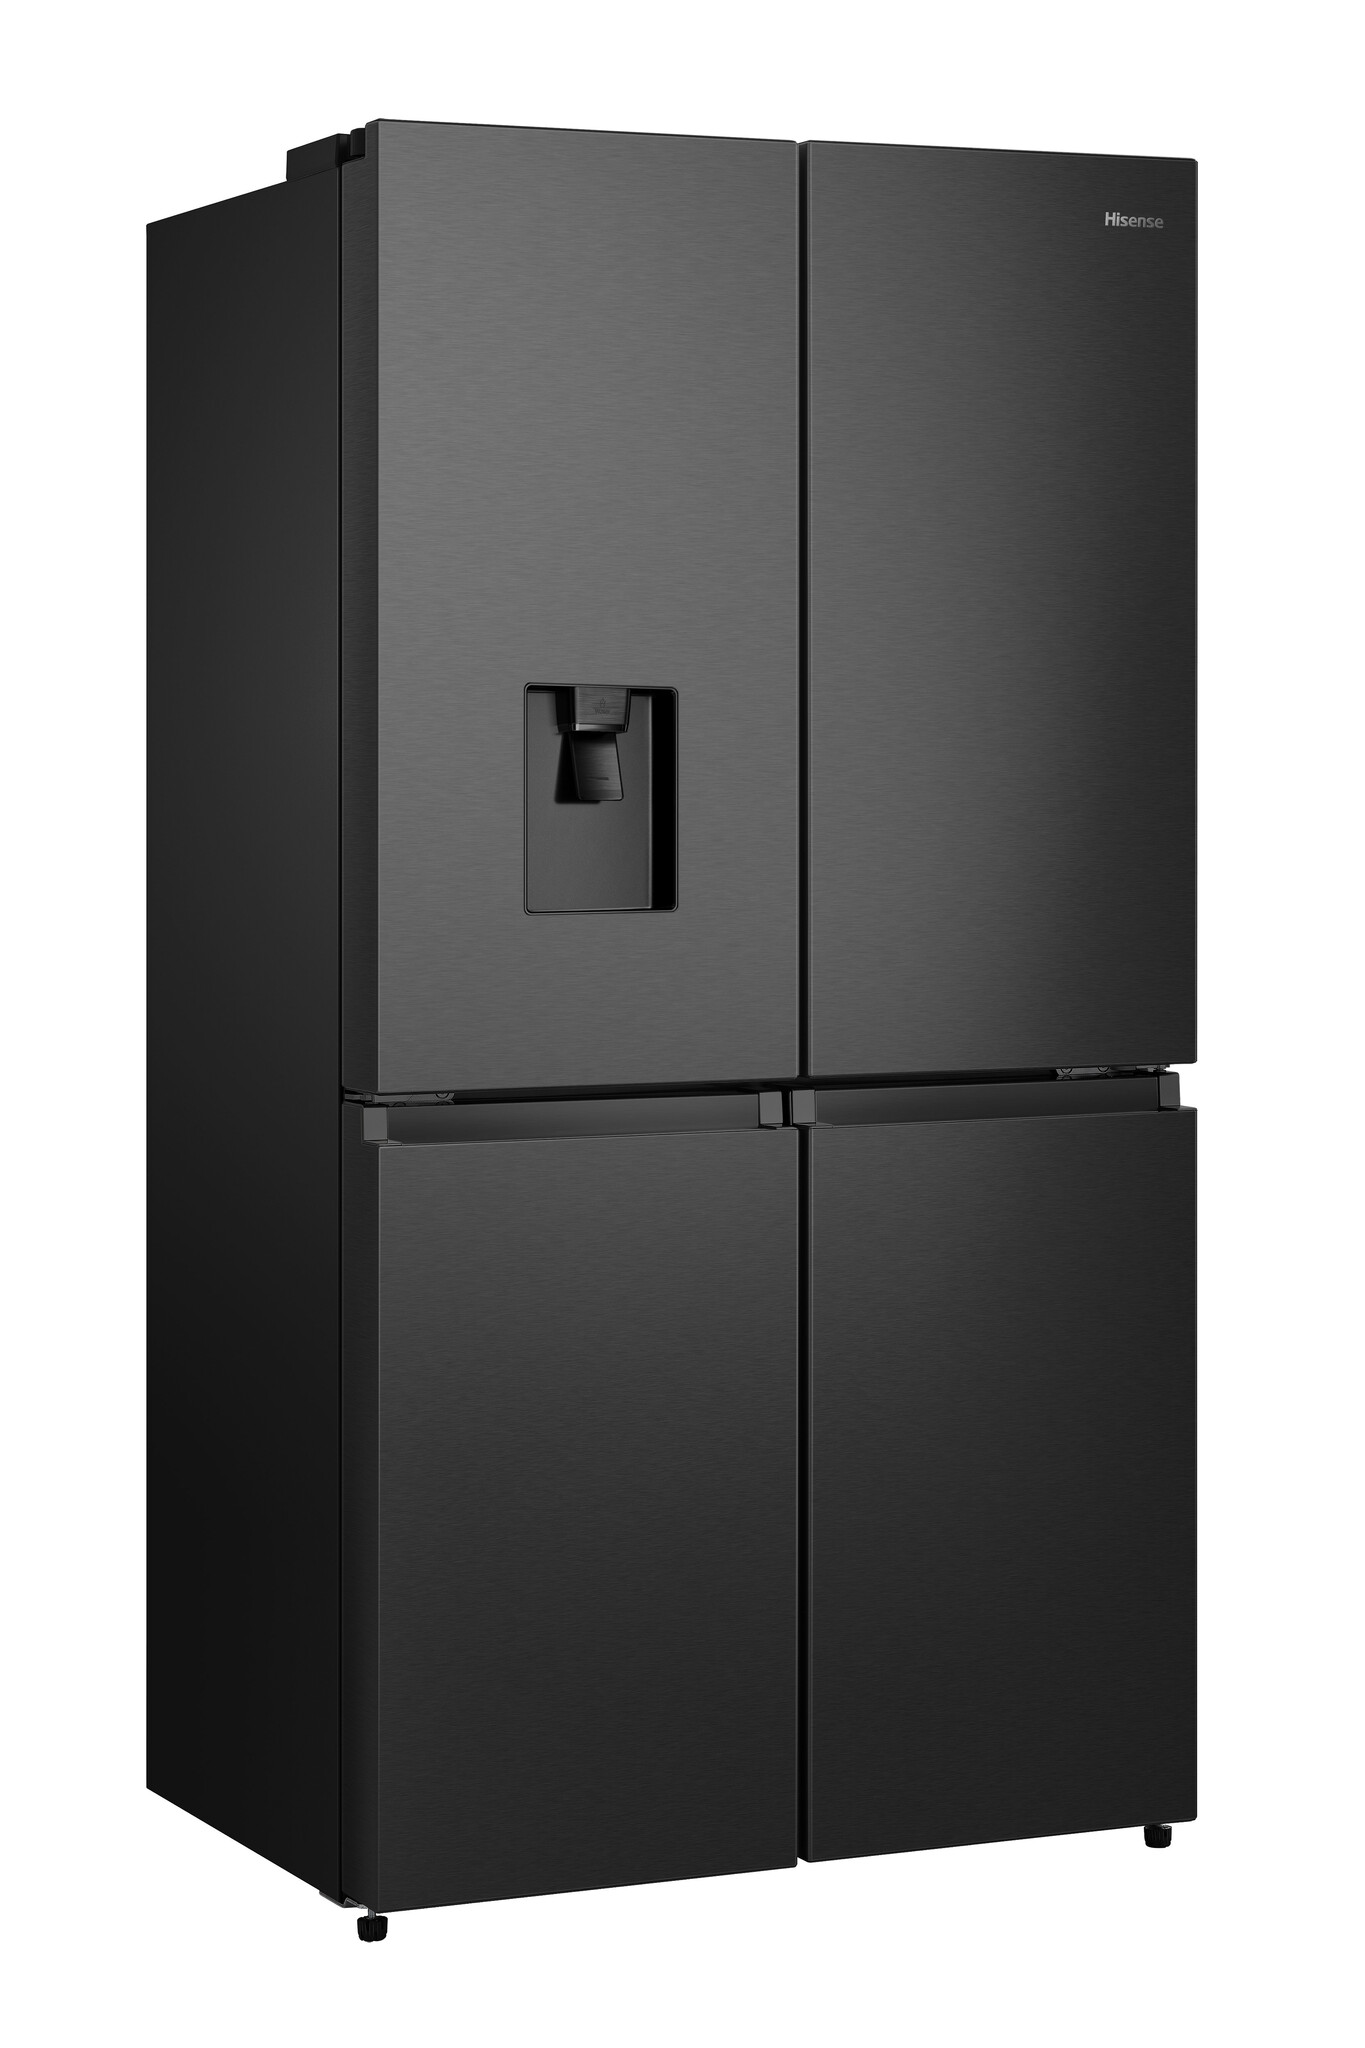 Hisense RQ758N4SWFE Wifi Connected Total No Frost American Fridge Freezer – Black – E Rated #367304